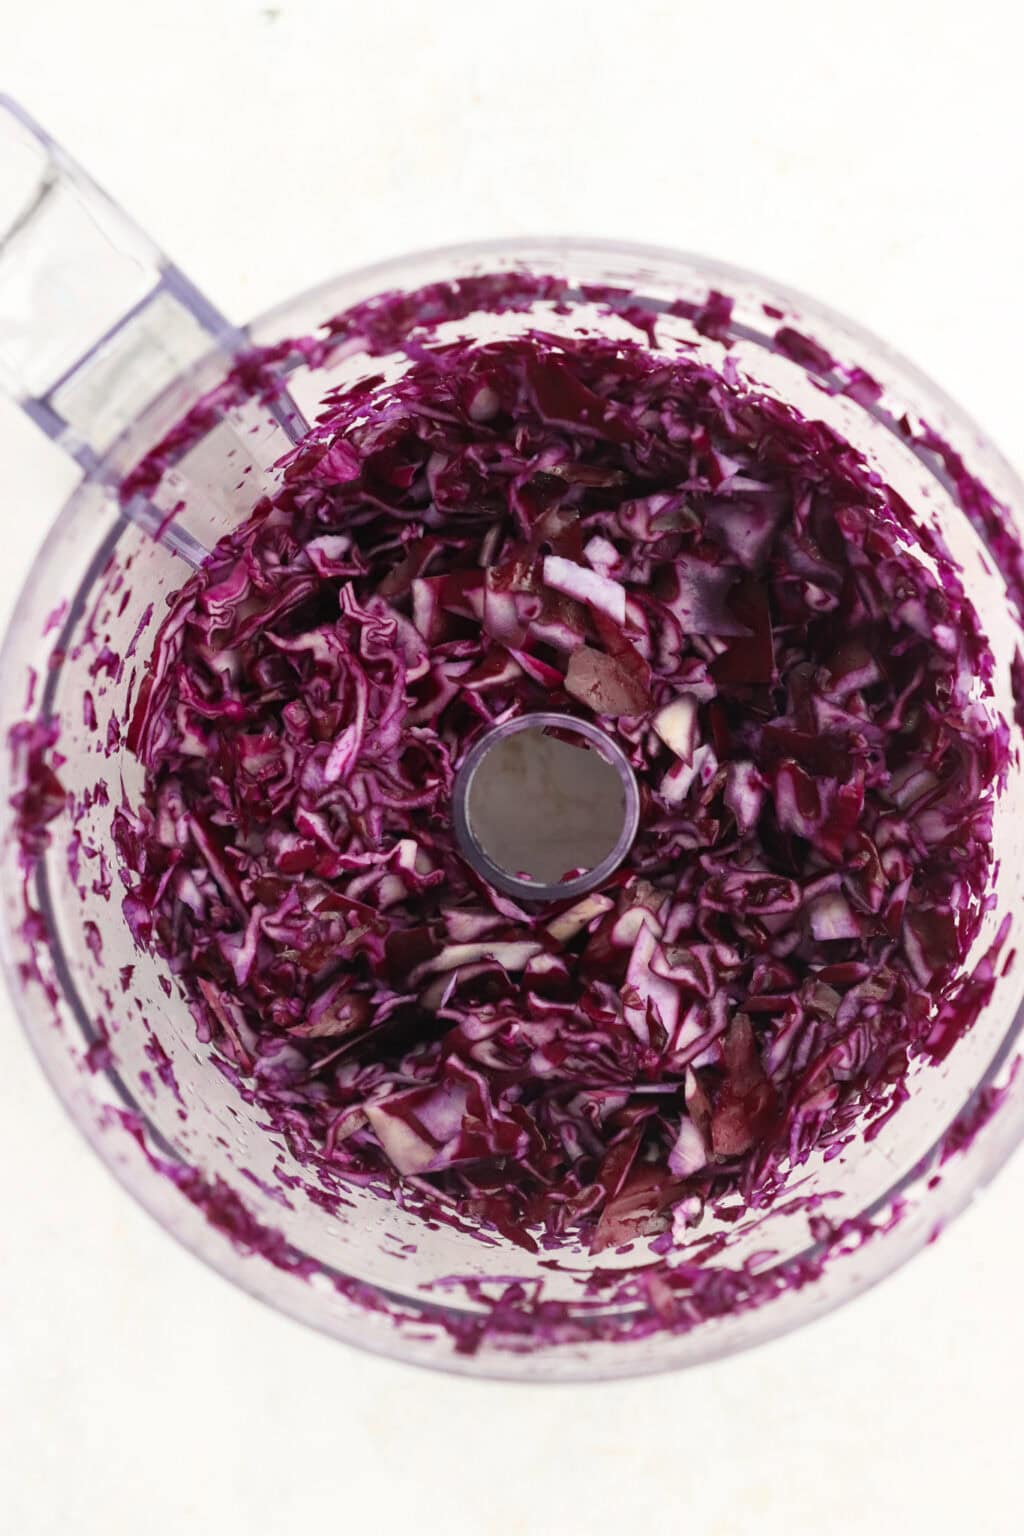 Shredded red cabbage in a food processor